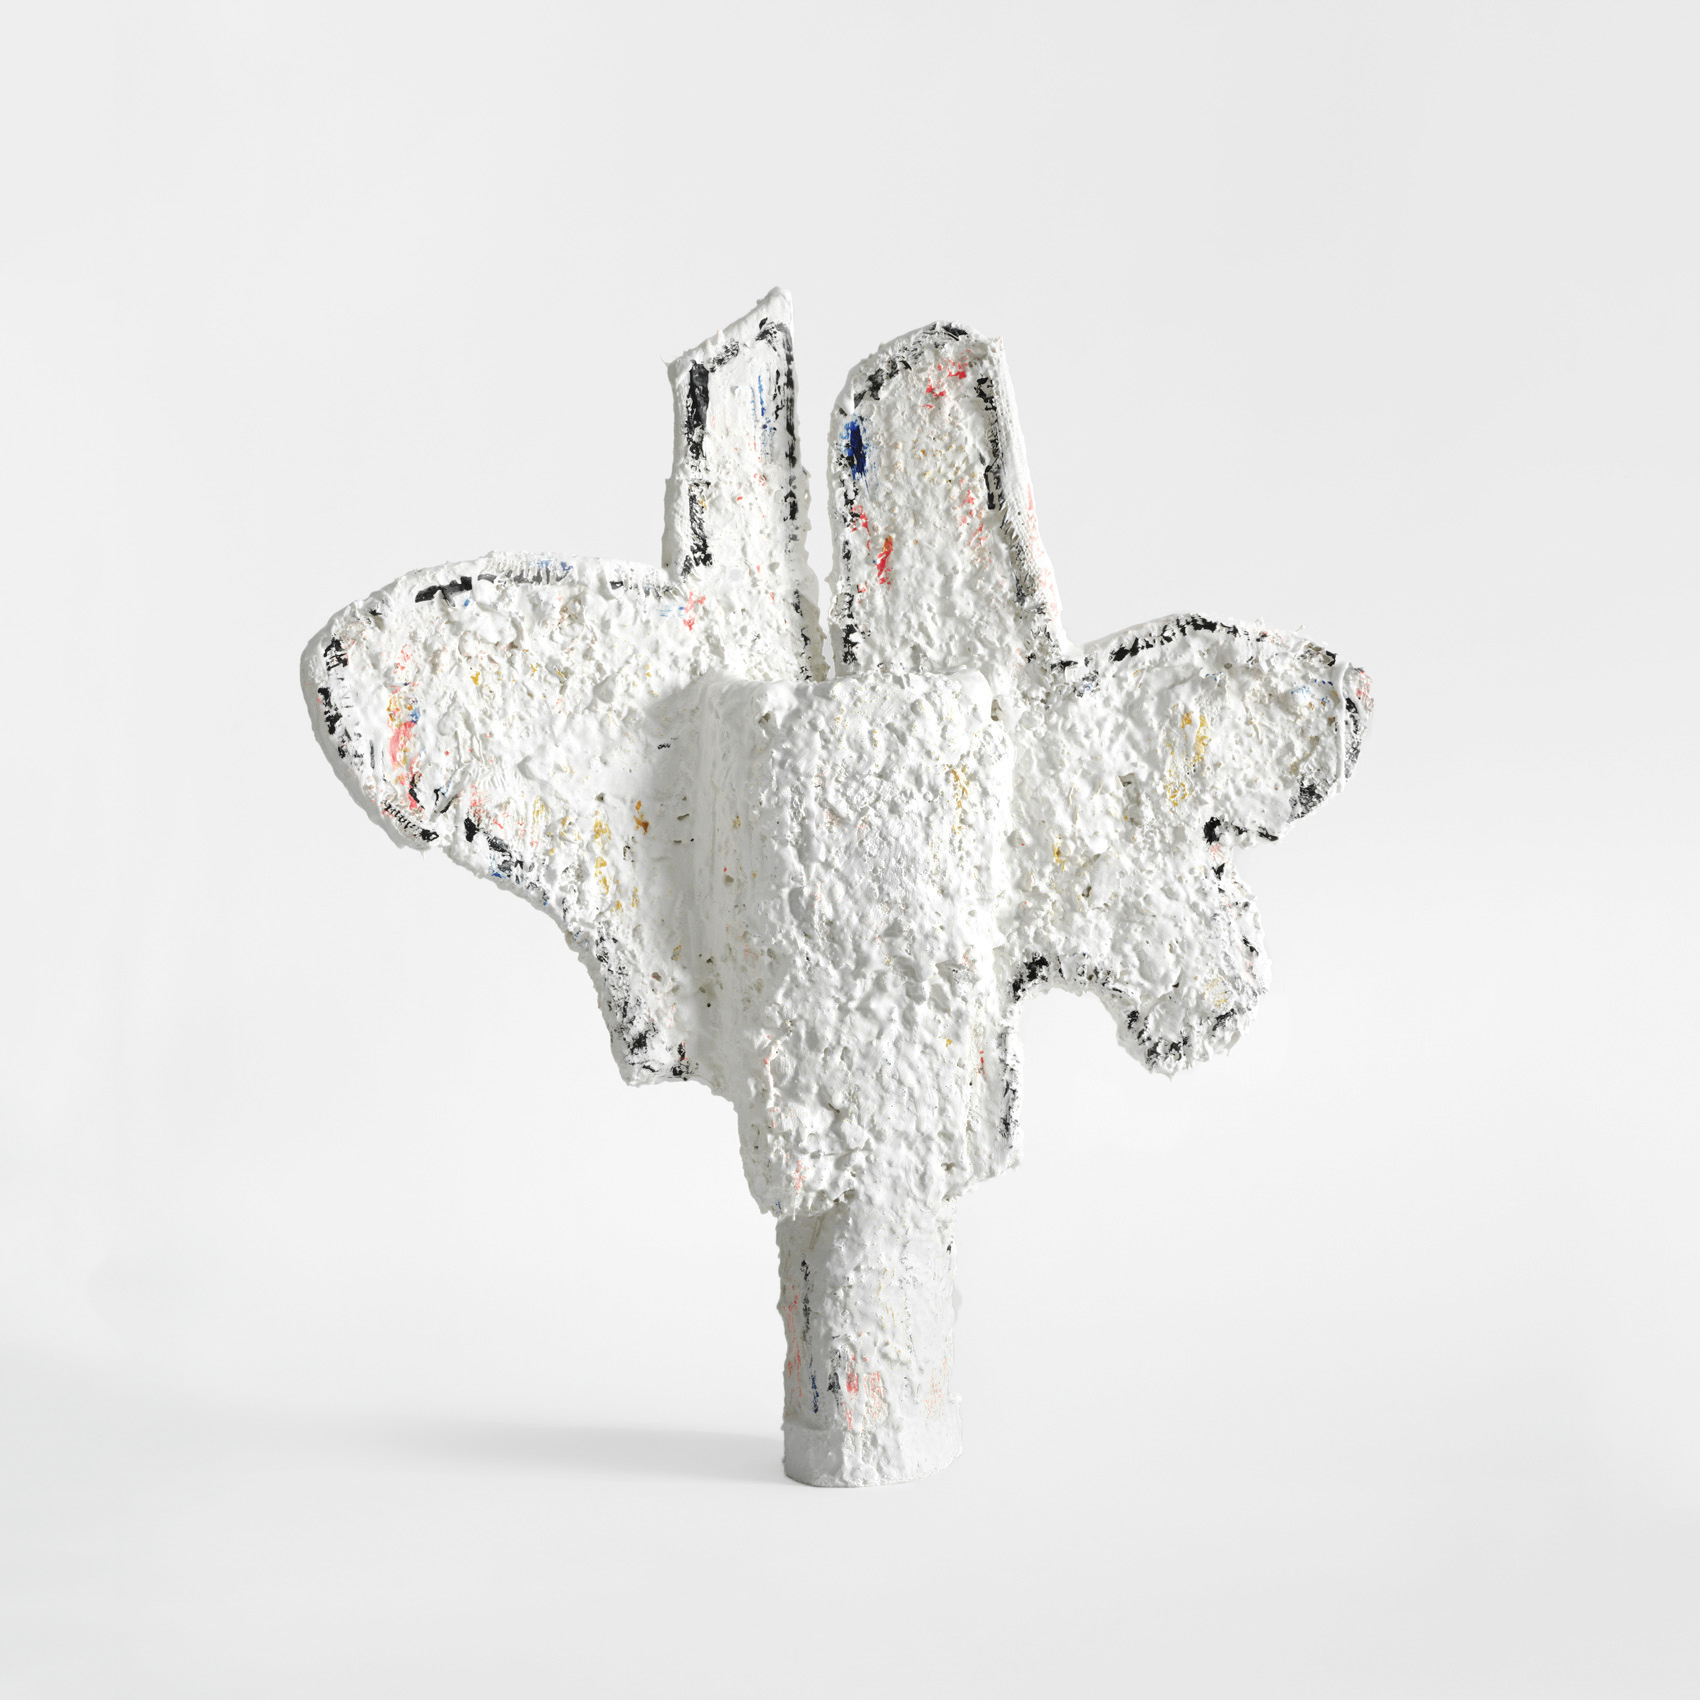 Untitled 2021 Plaster with Acrylic Paint 2 by guy corriero